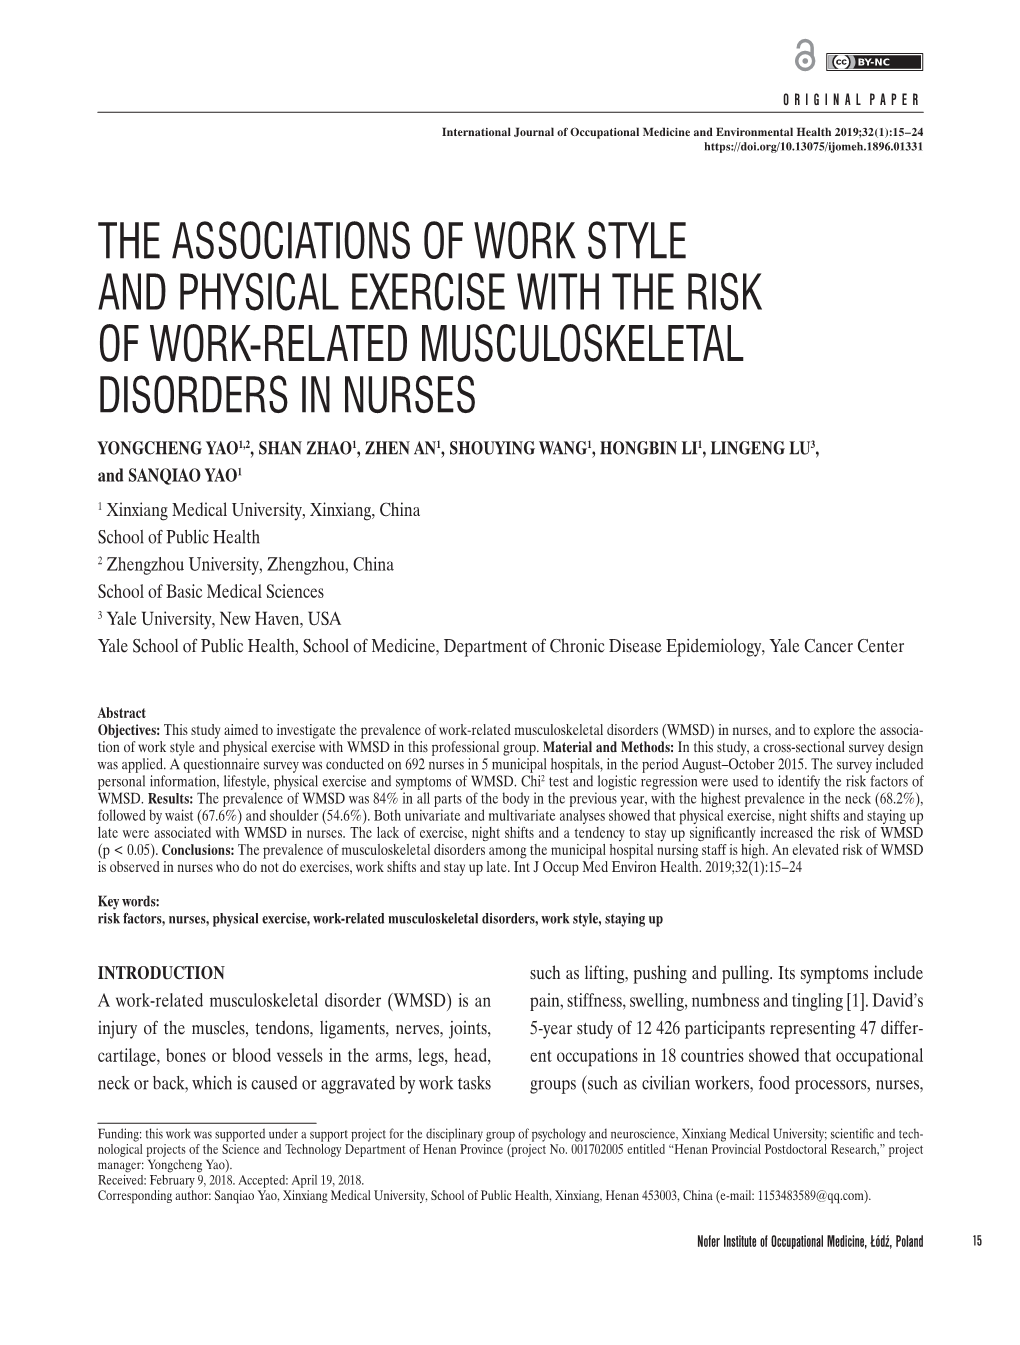 The Associations of Work Style and Physical Exercise